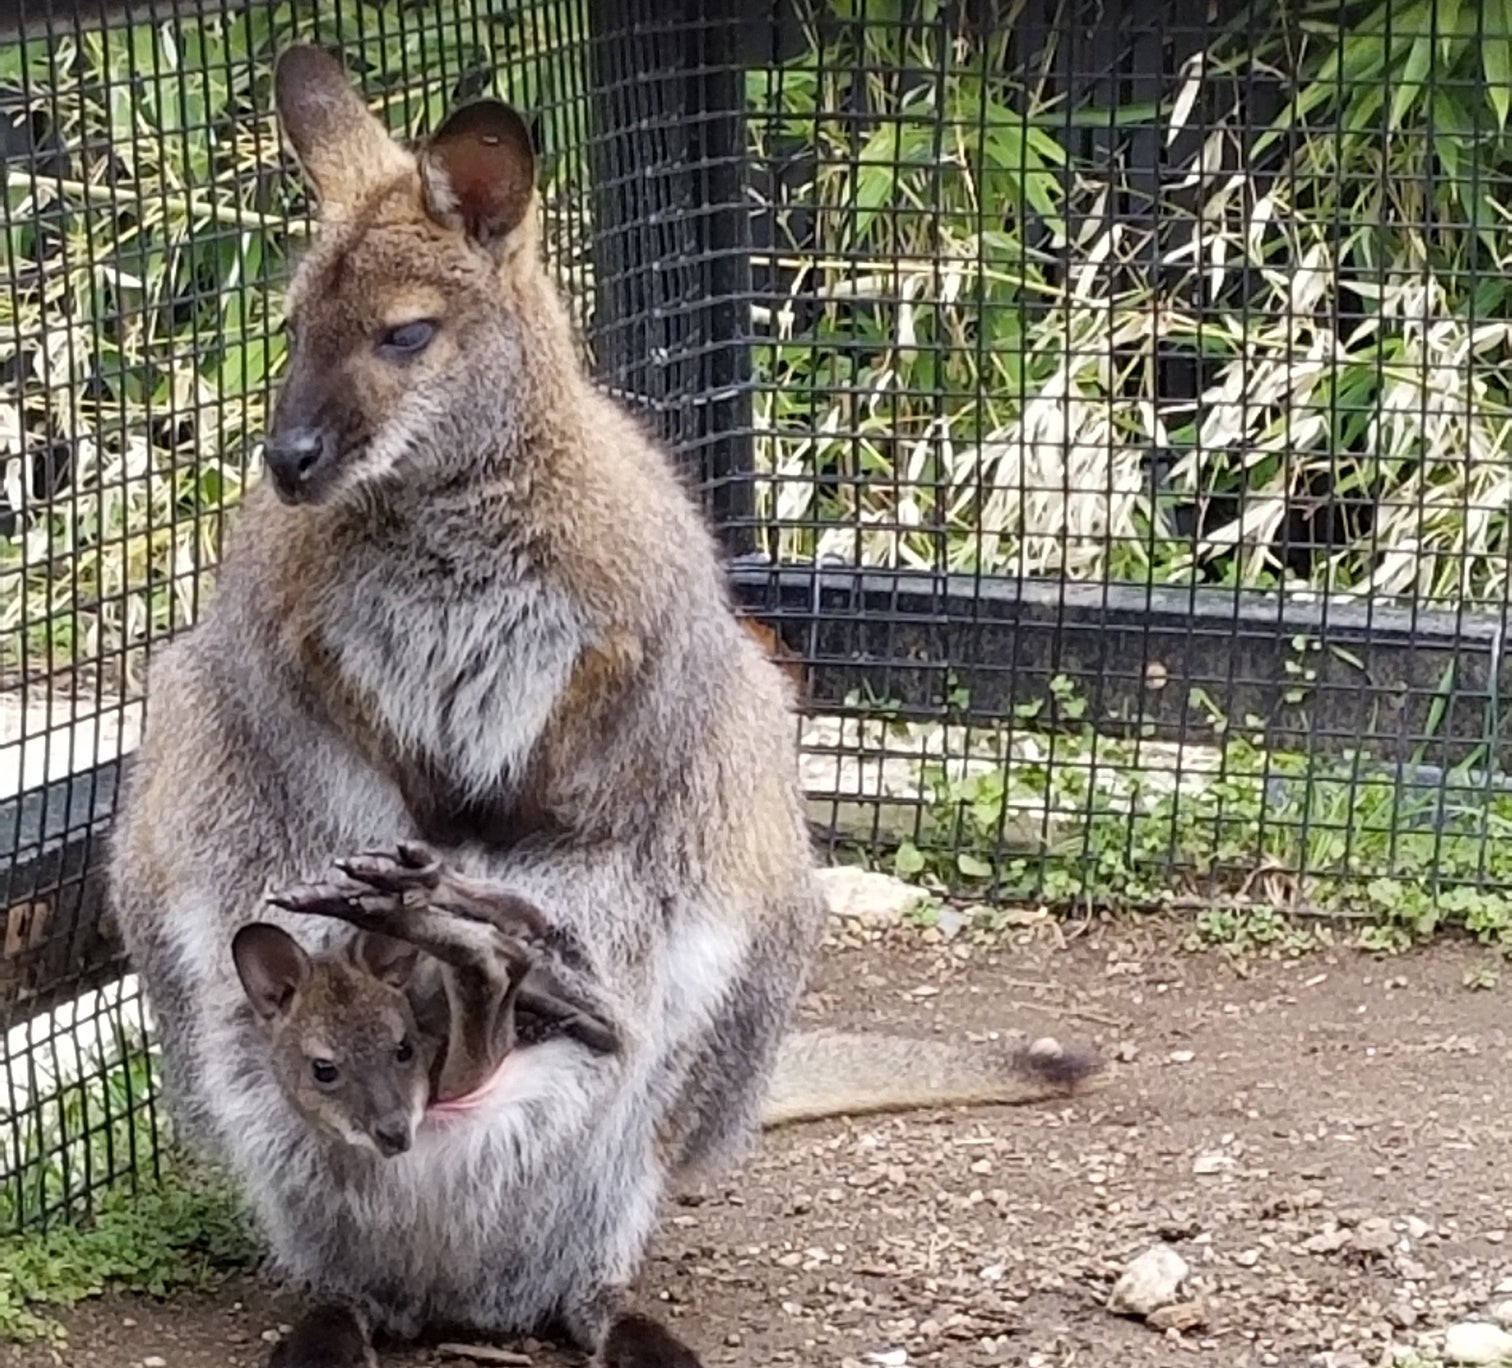 A Bennett's wallaby joey sticks its head and feet out of its mother's pouch.